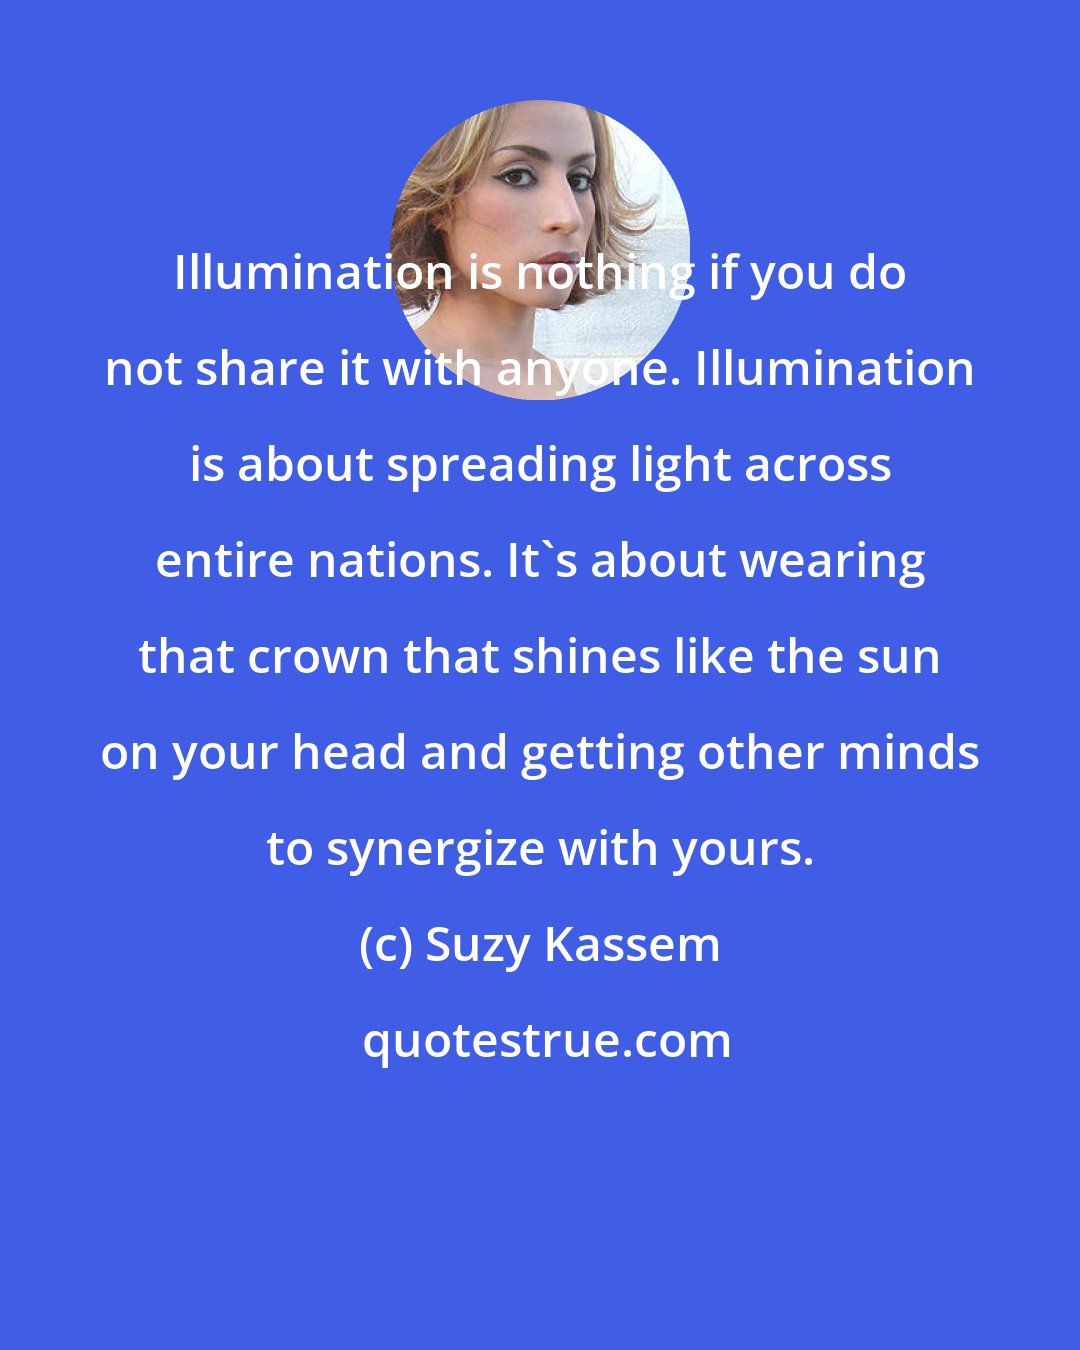 Suzy Kassem: Illumination is nothing if you do not share it with anyone. Illumination is about spreading light across entire nations. It's about wearing that crown that shines like the sun on your head and getting other minds to synergize with yours.